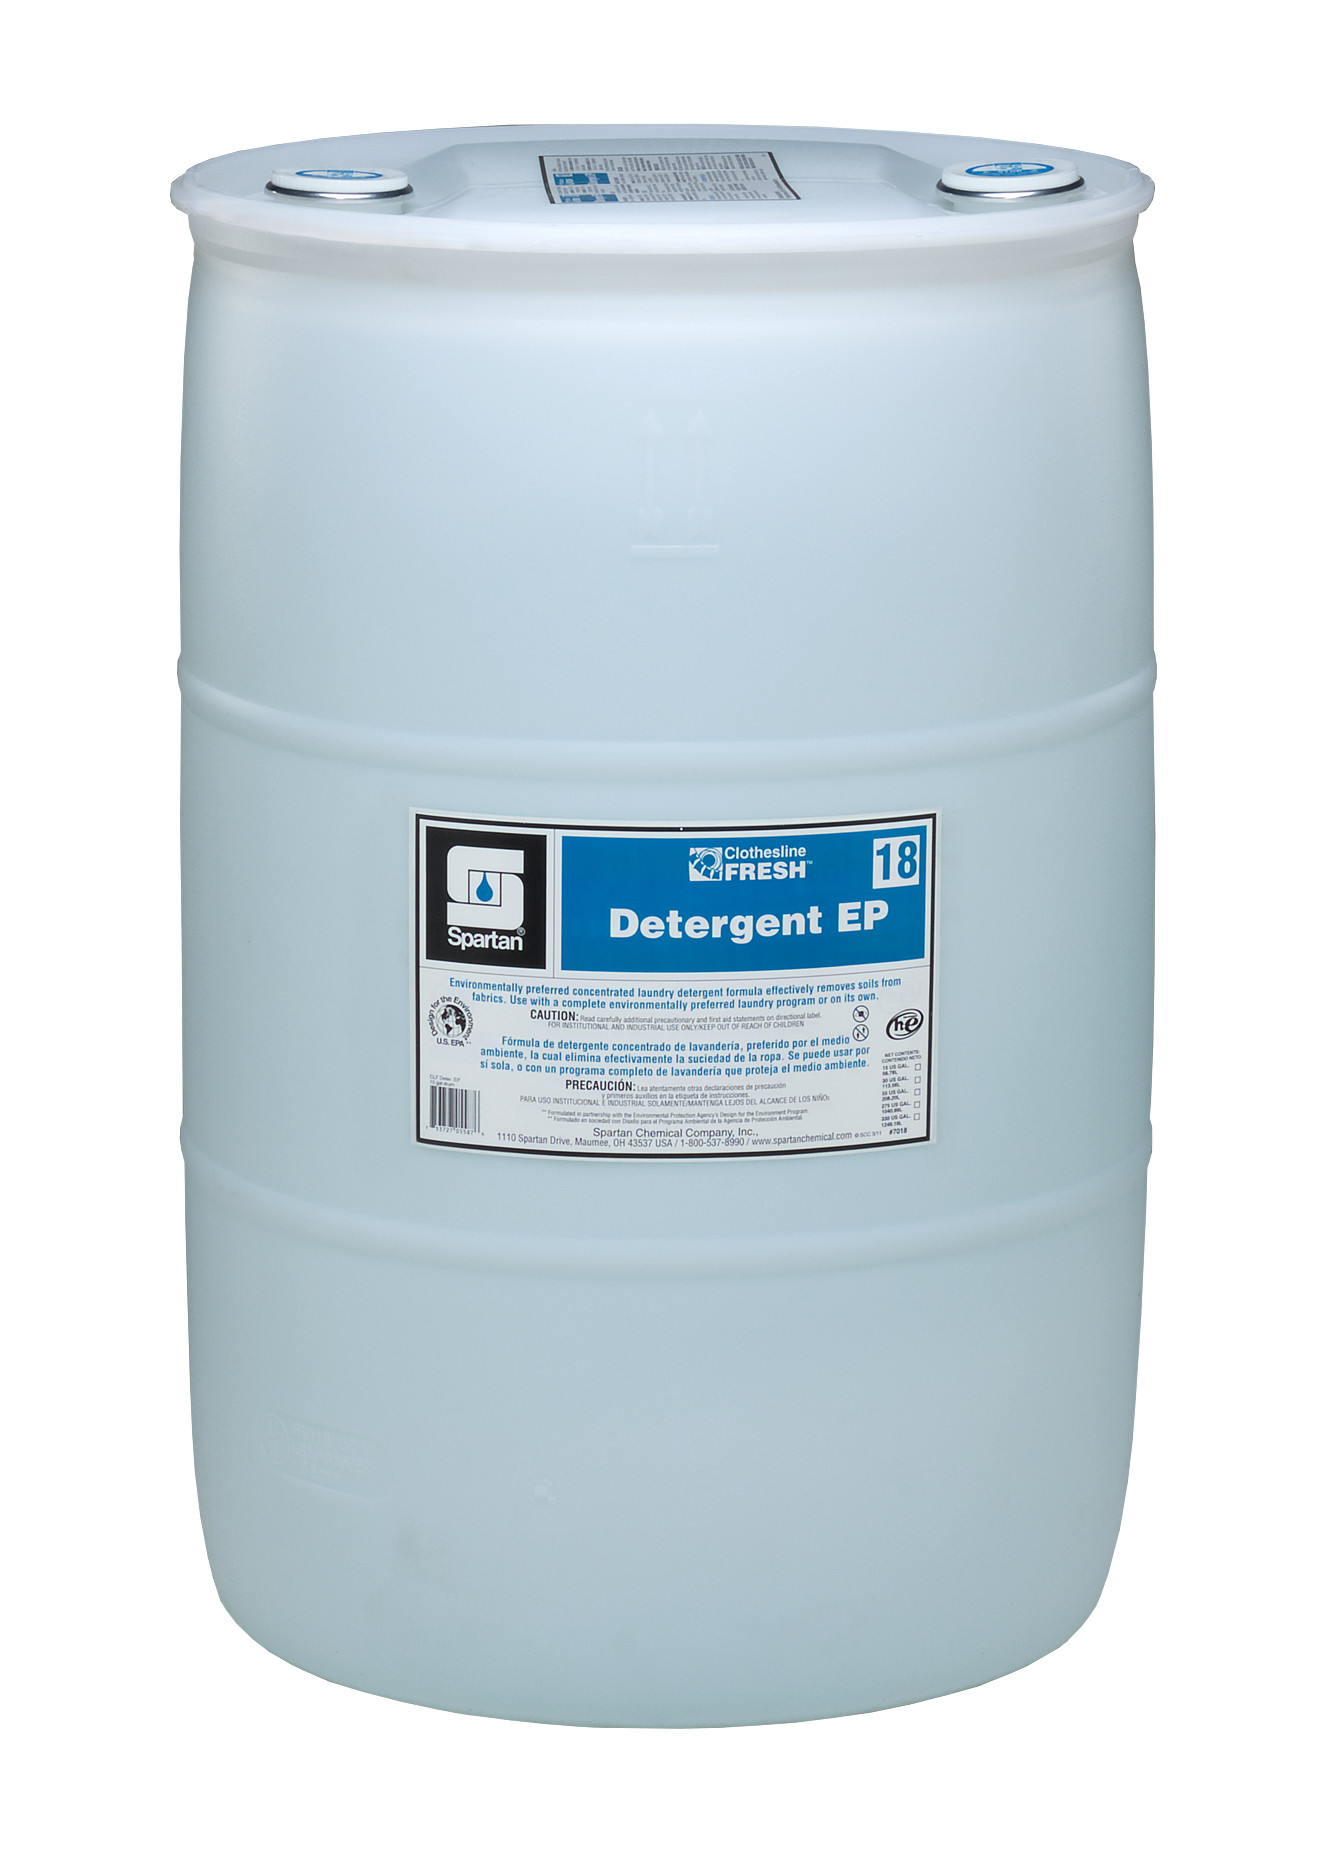 Spartan Chemical Company Clothesline Fresh Detergent EP 18, 55 GAL DRUM